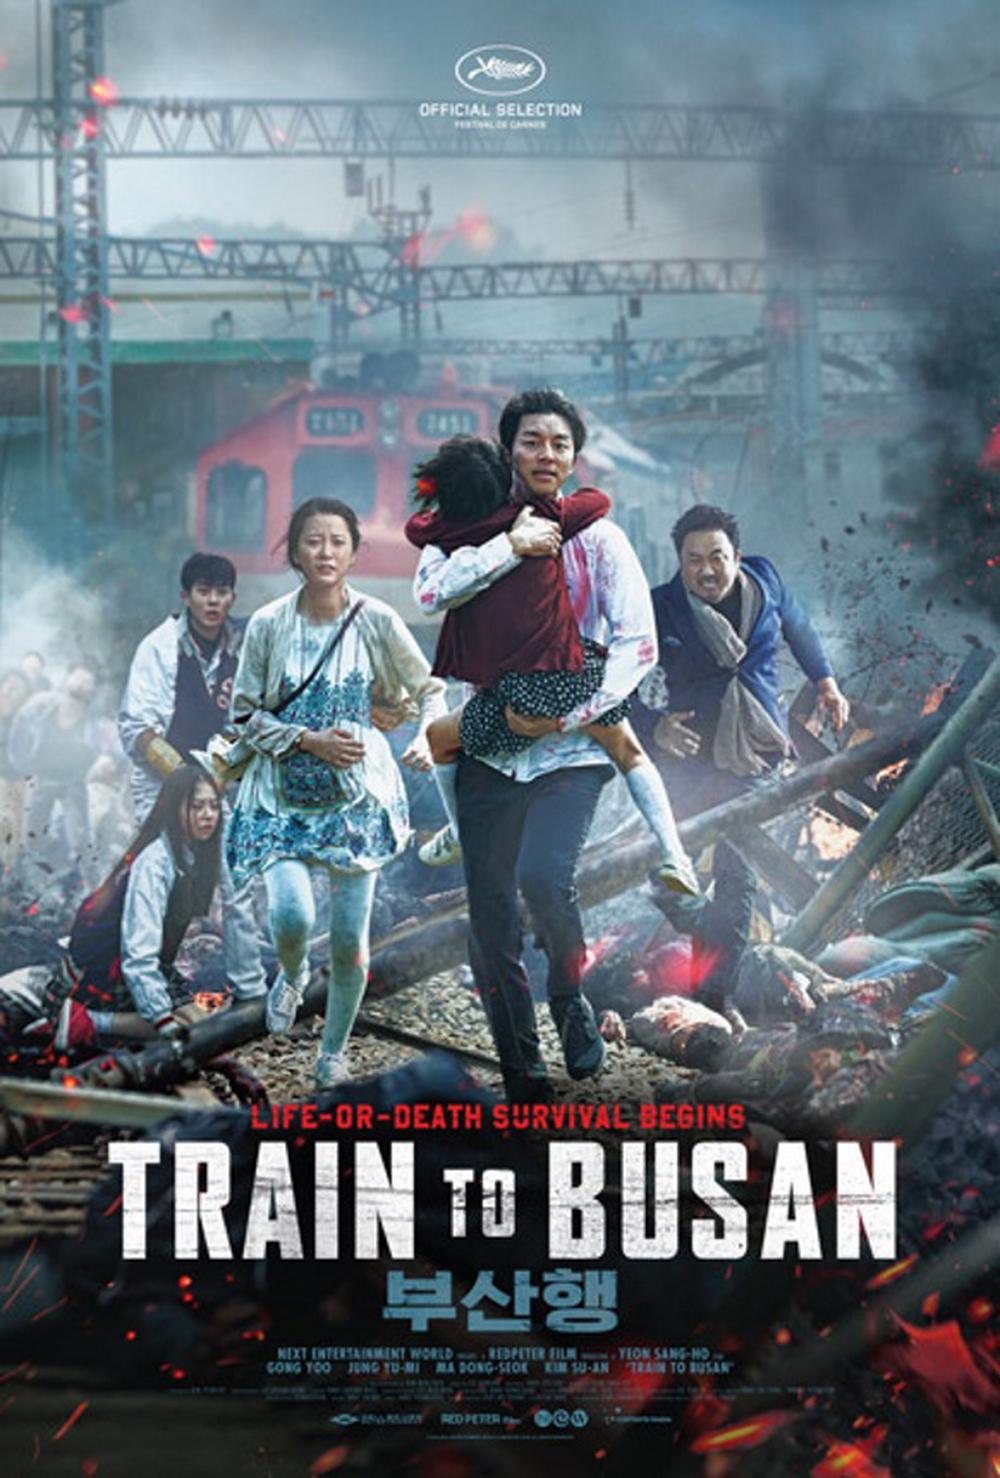 Train To Busan Movie Review